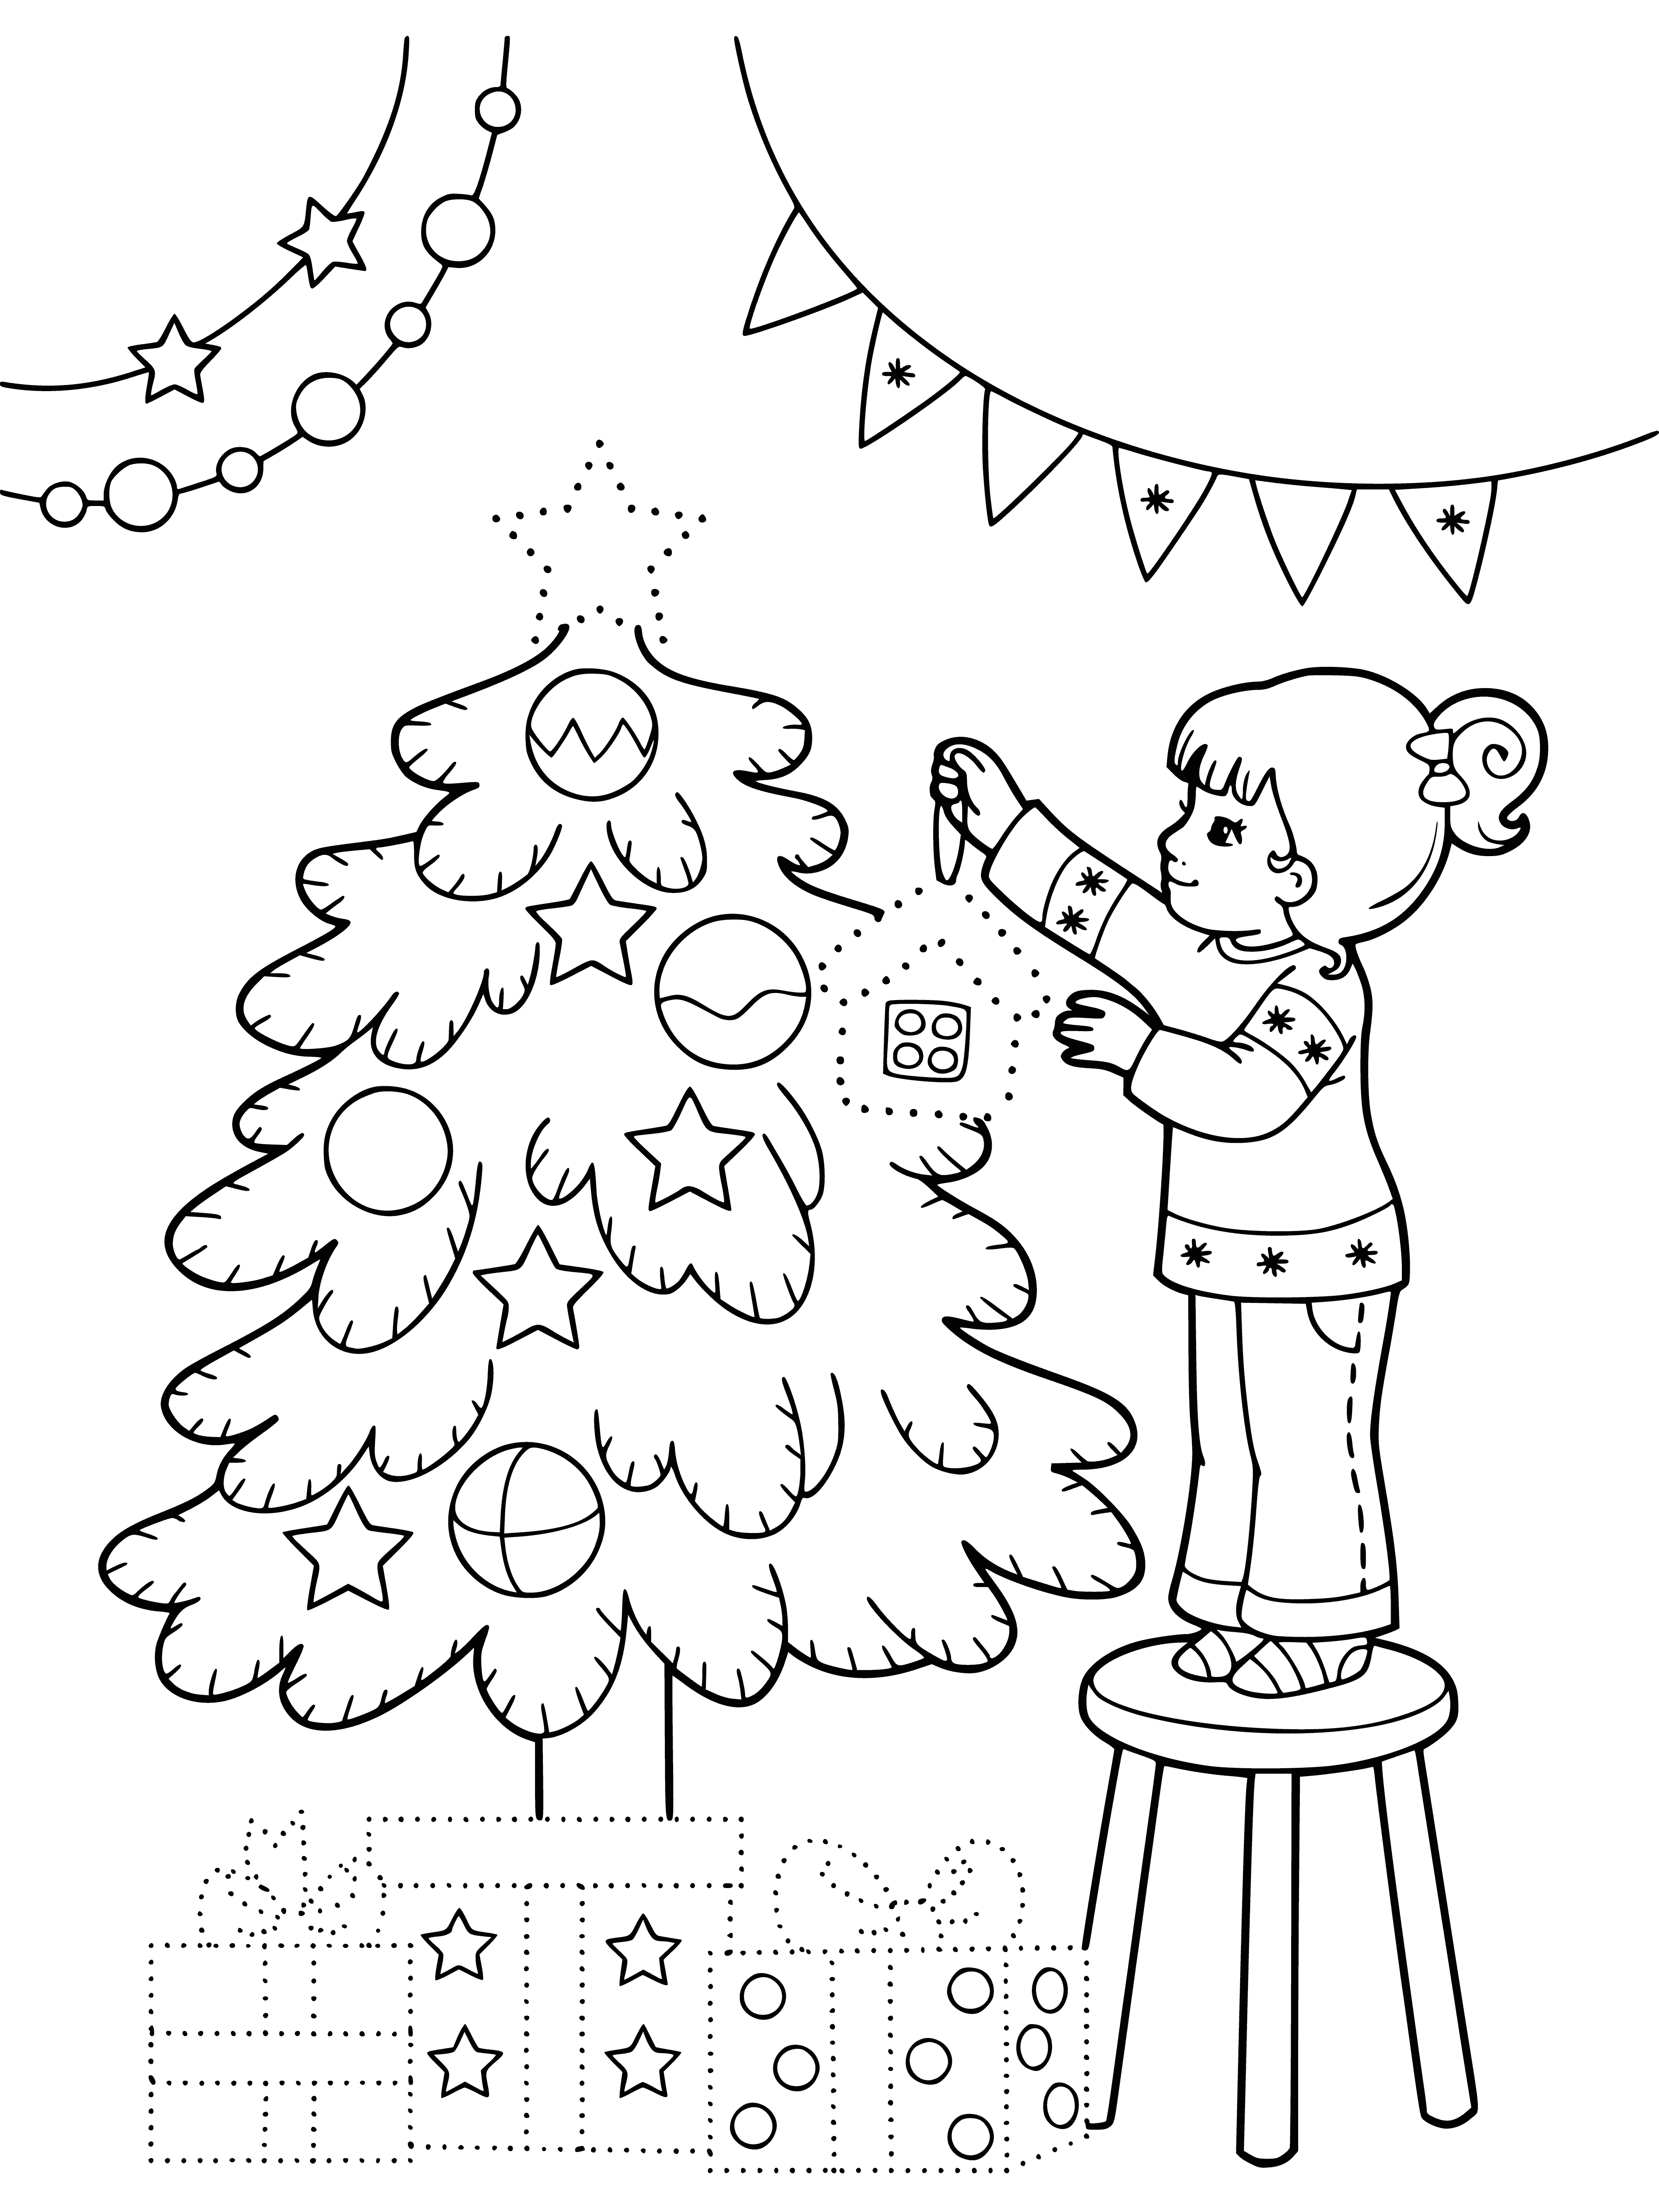 coloring page: Girl decorating Xmas tree. Has string of lights and star for top. Already some decorations on tree.